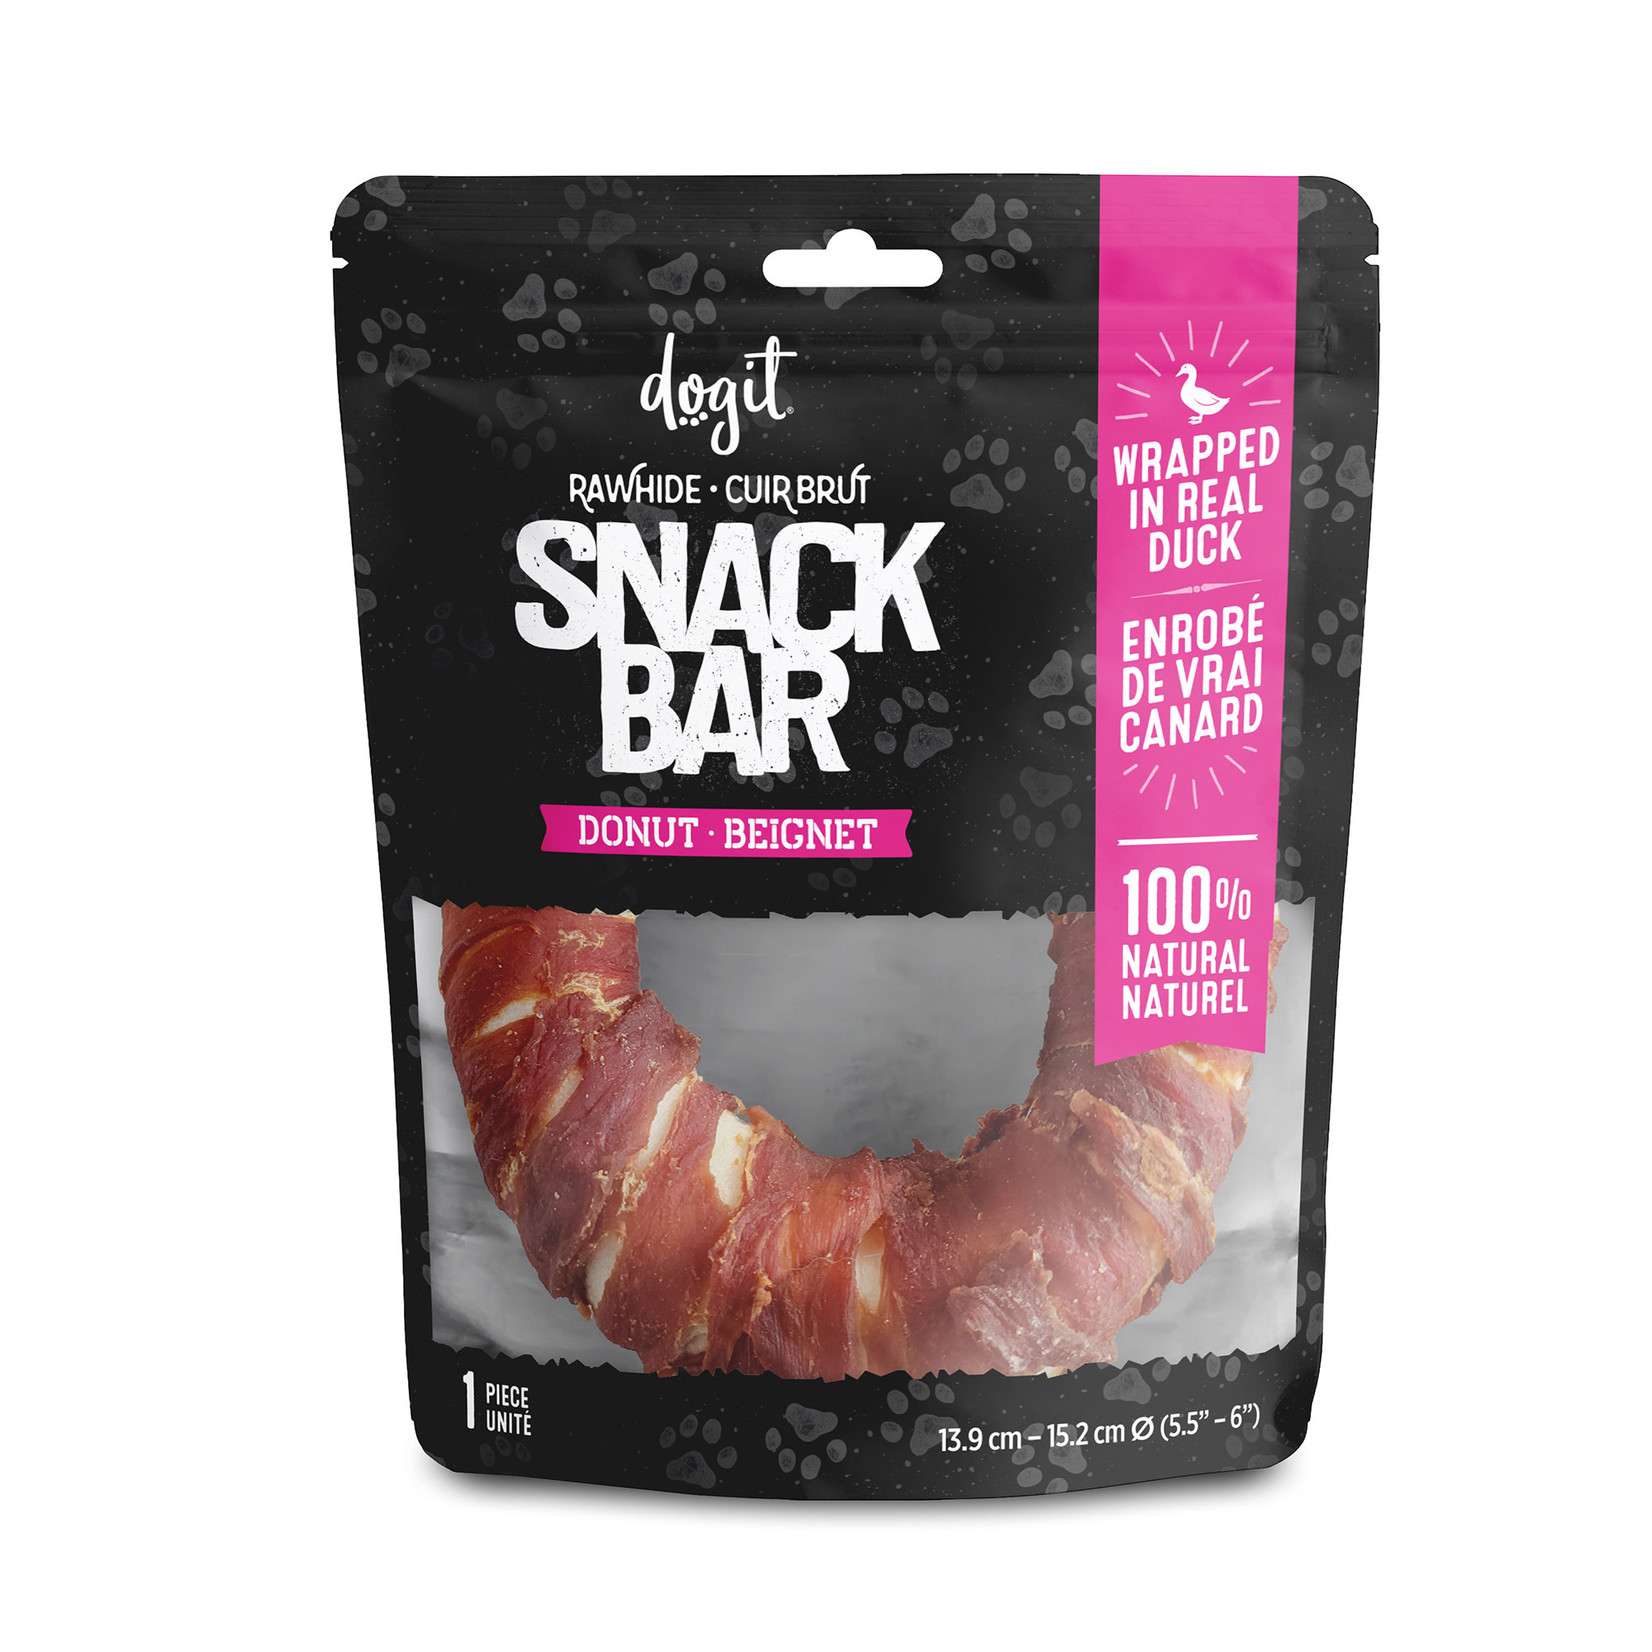 DOG IT Dogit Snack Bar Rawhide - Duck-Wrapped Donut - 1 pc (13.9 - 15.2 cm/5.5 - 6 in dia.)